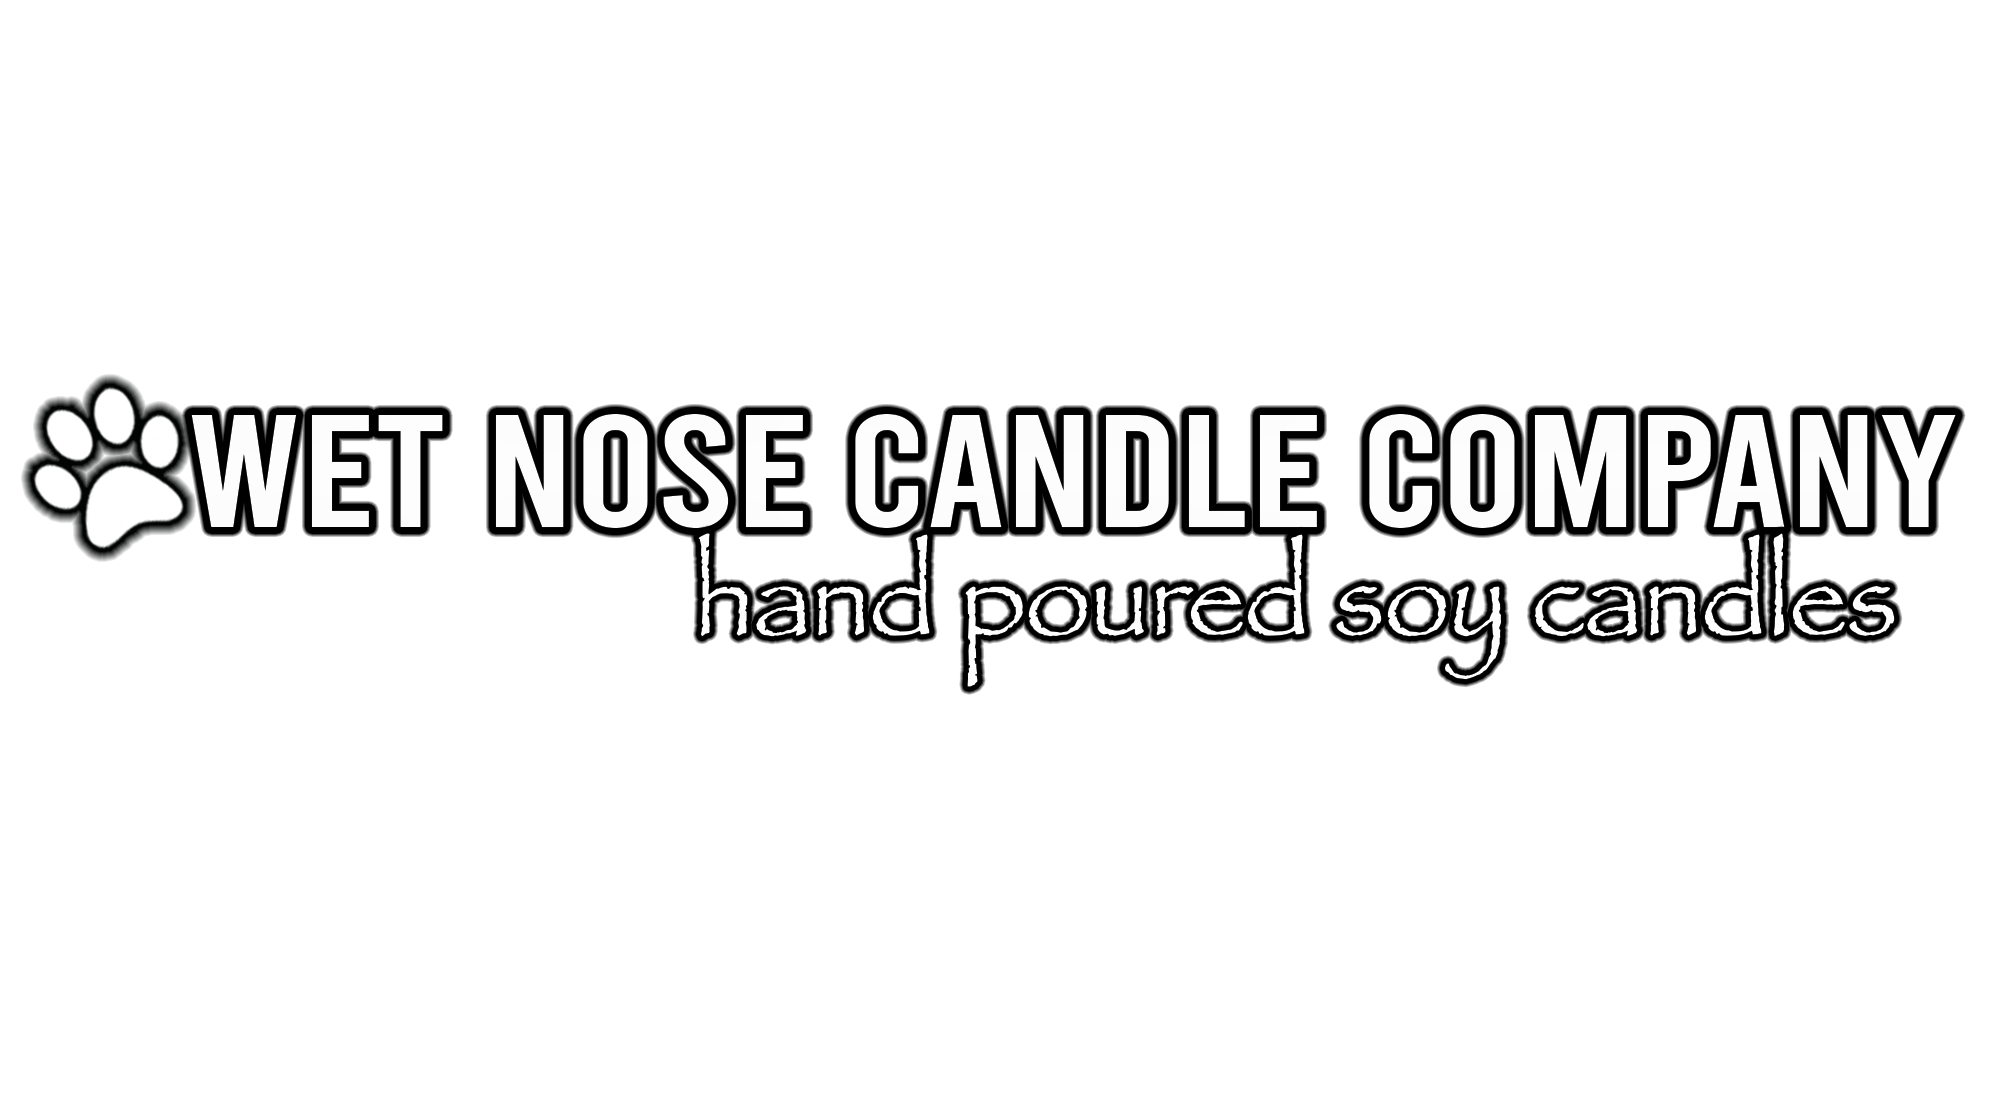 Wet Nose Candle Company